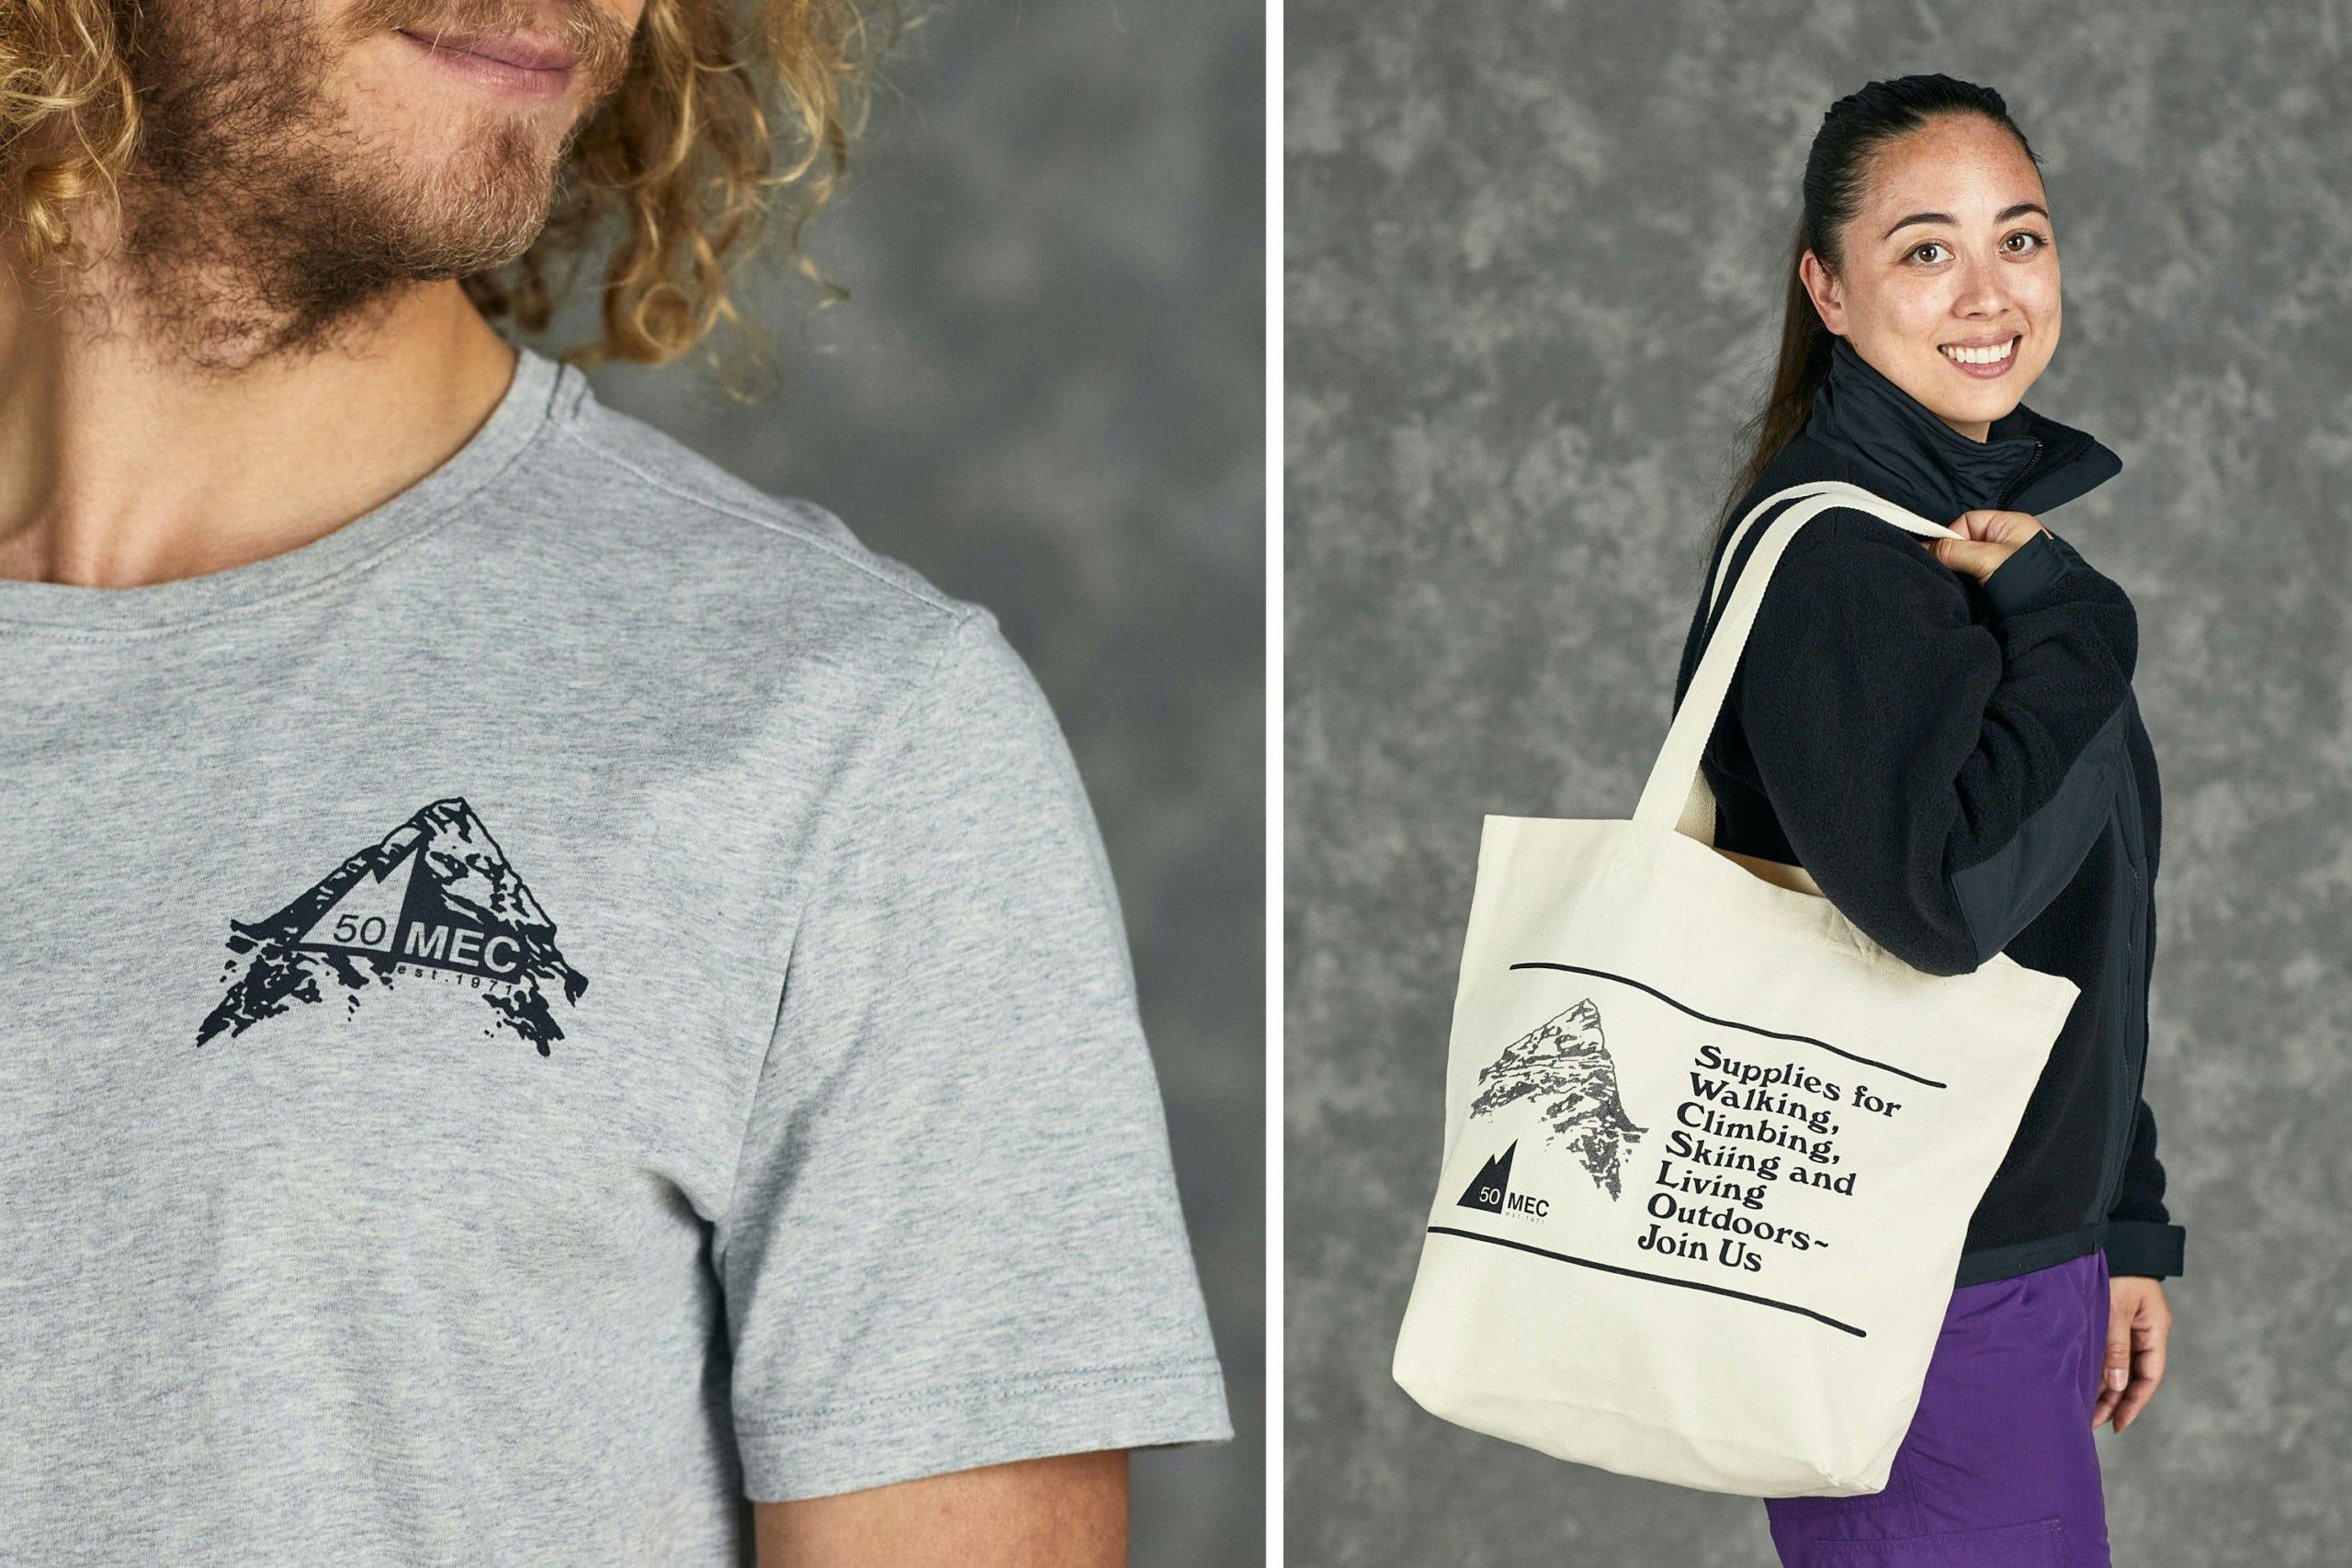 Person wearing a t-shirt with an MEC 50 logo, another person with a tote bag that has outdoor words printed on it